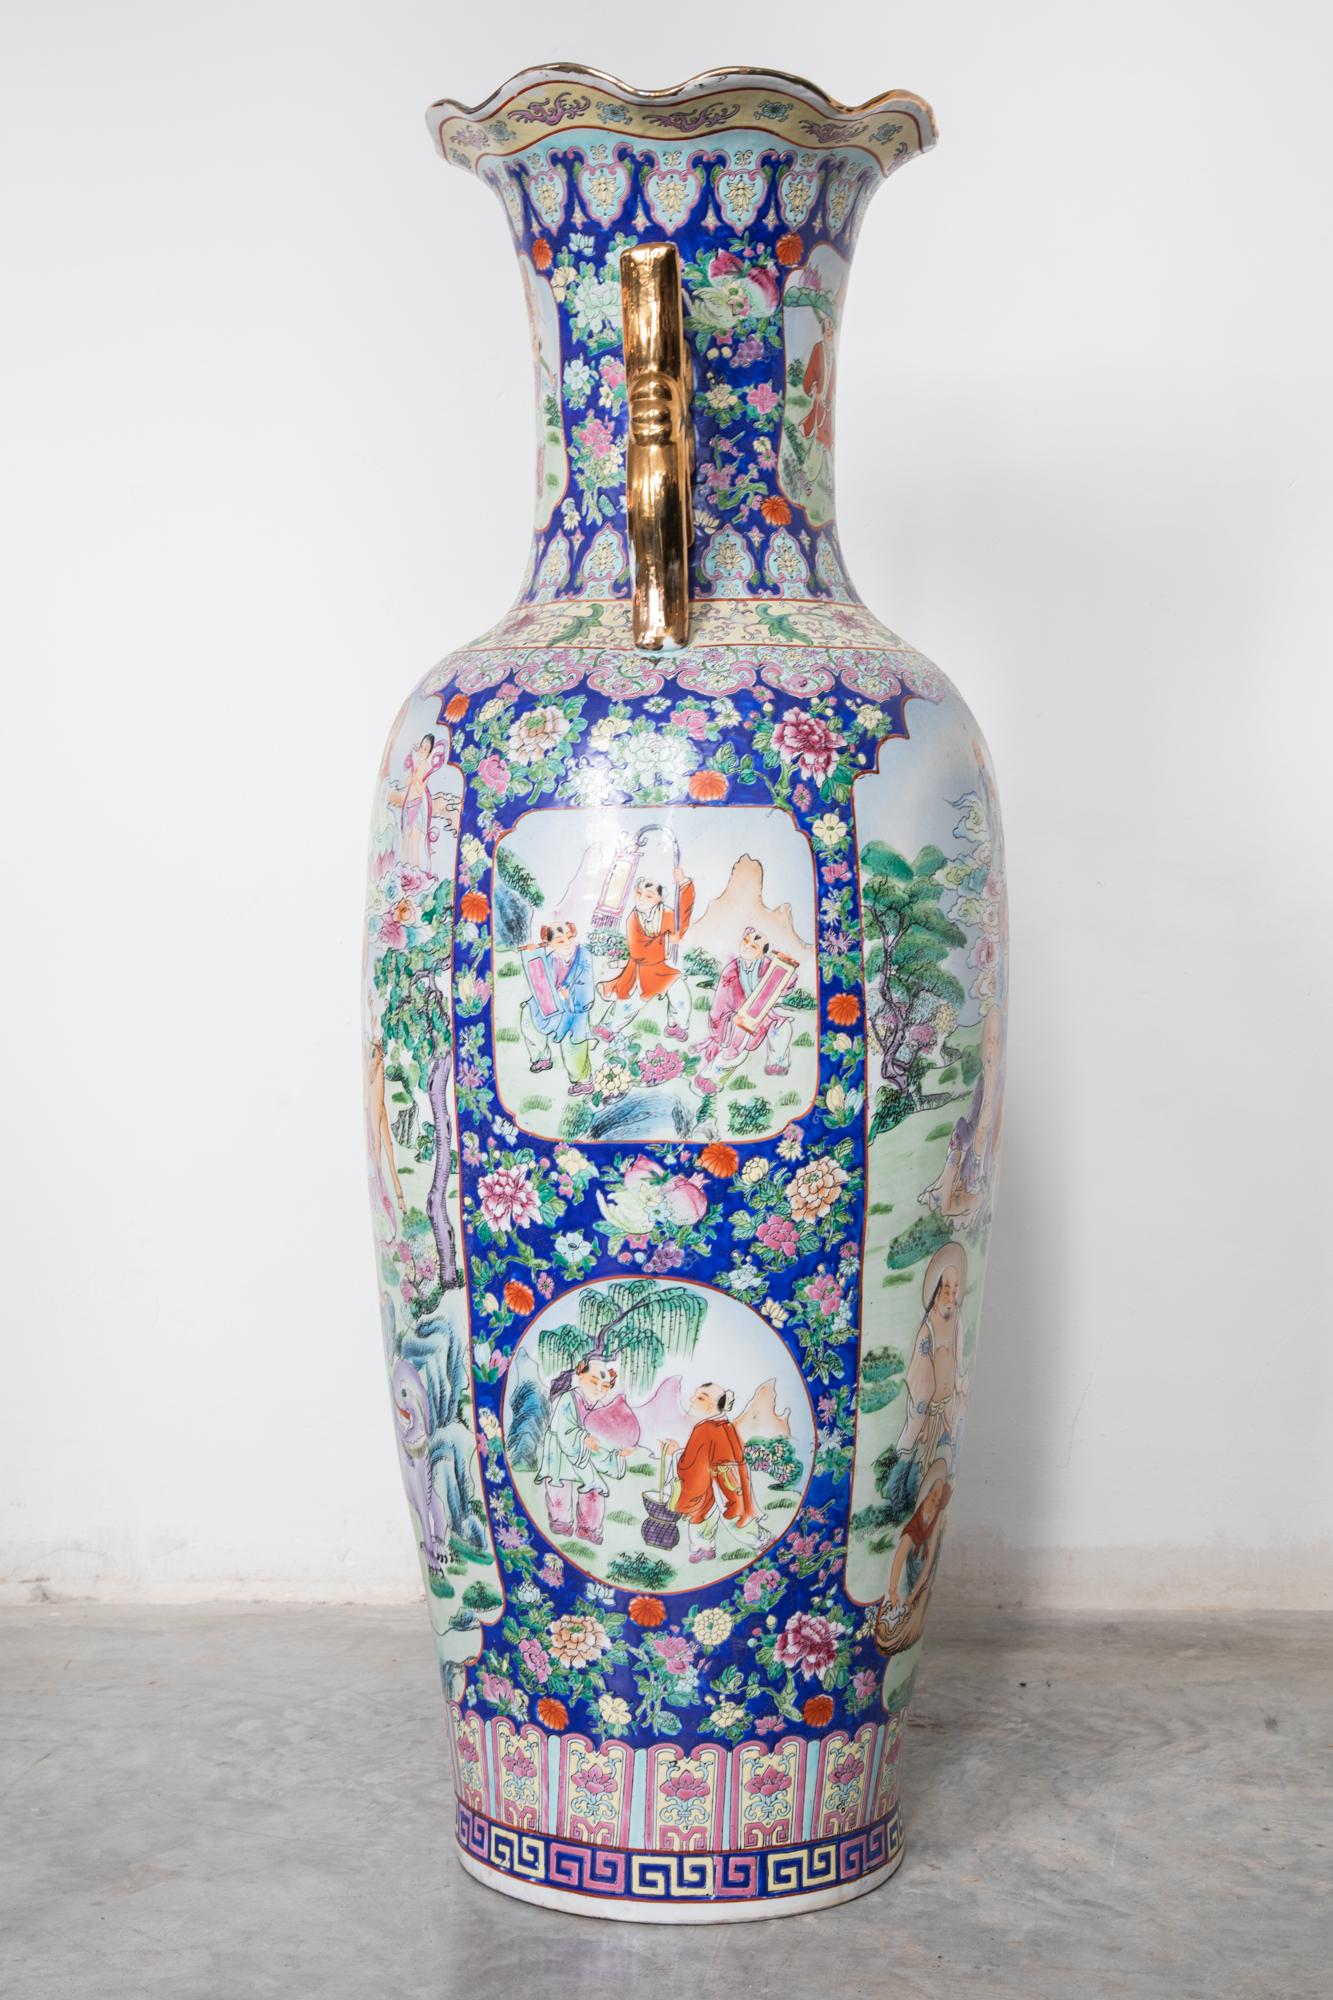 Large Cantonese baluster vase. Features decorated hand-painted polychrome Family Rose palette with cartouche panels of figures in a hunting scene motif with exotic animals. Made in China for the European Market. Dimensions Height 50 inch.Canton